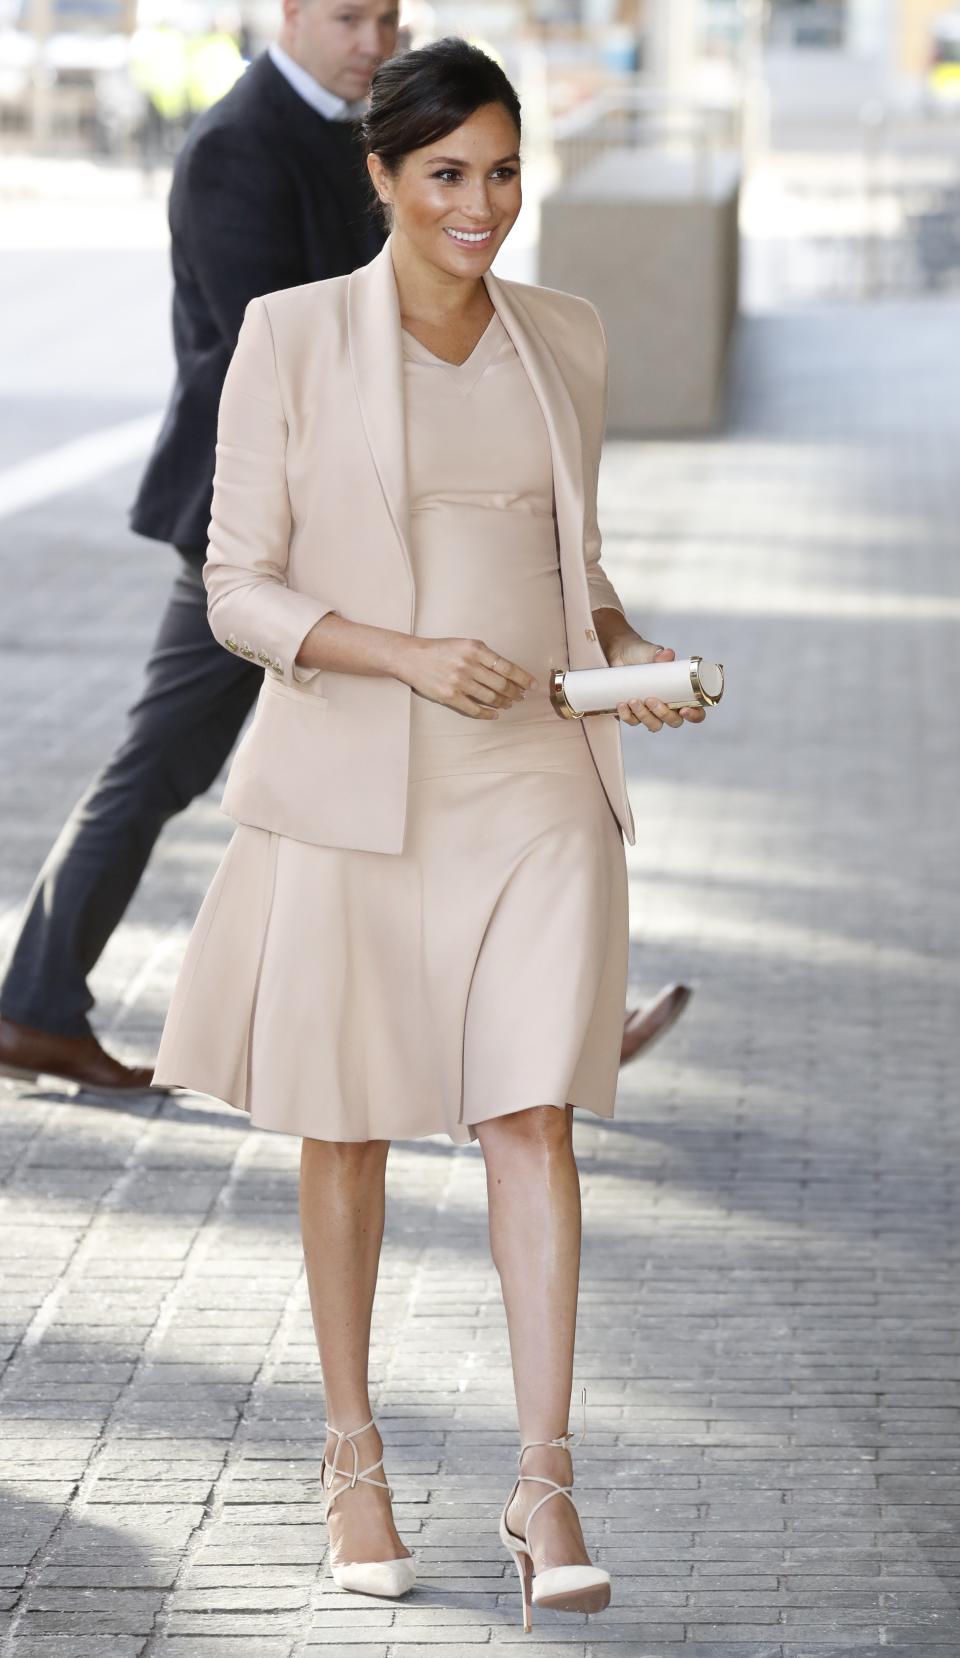 Blush pink is a mainstay in Meghan Markle's royal wardrobe, so she was bound to include it in a maternity look eventually.